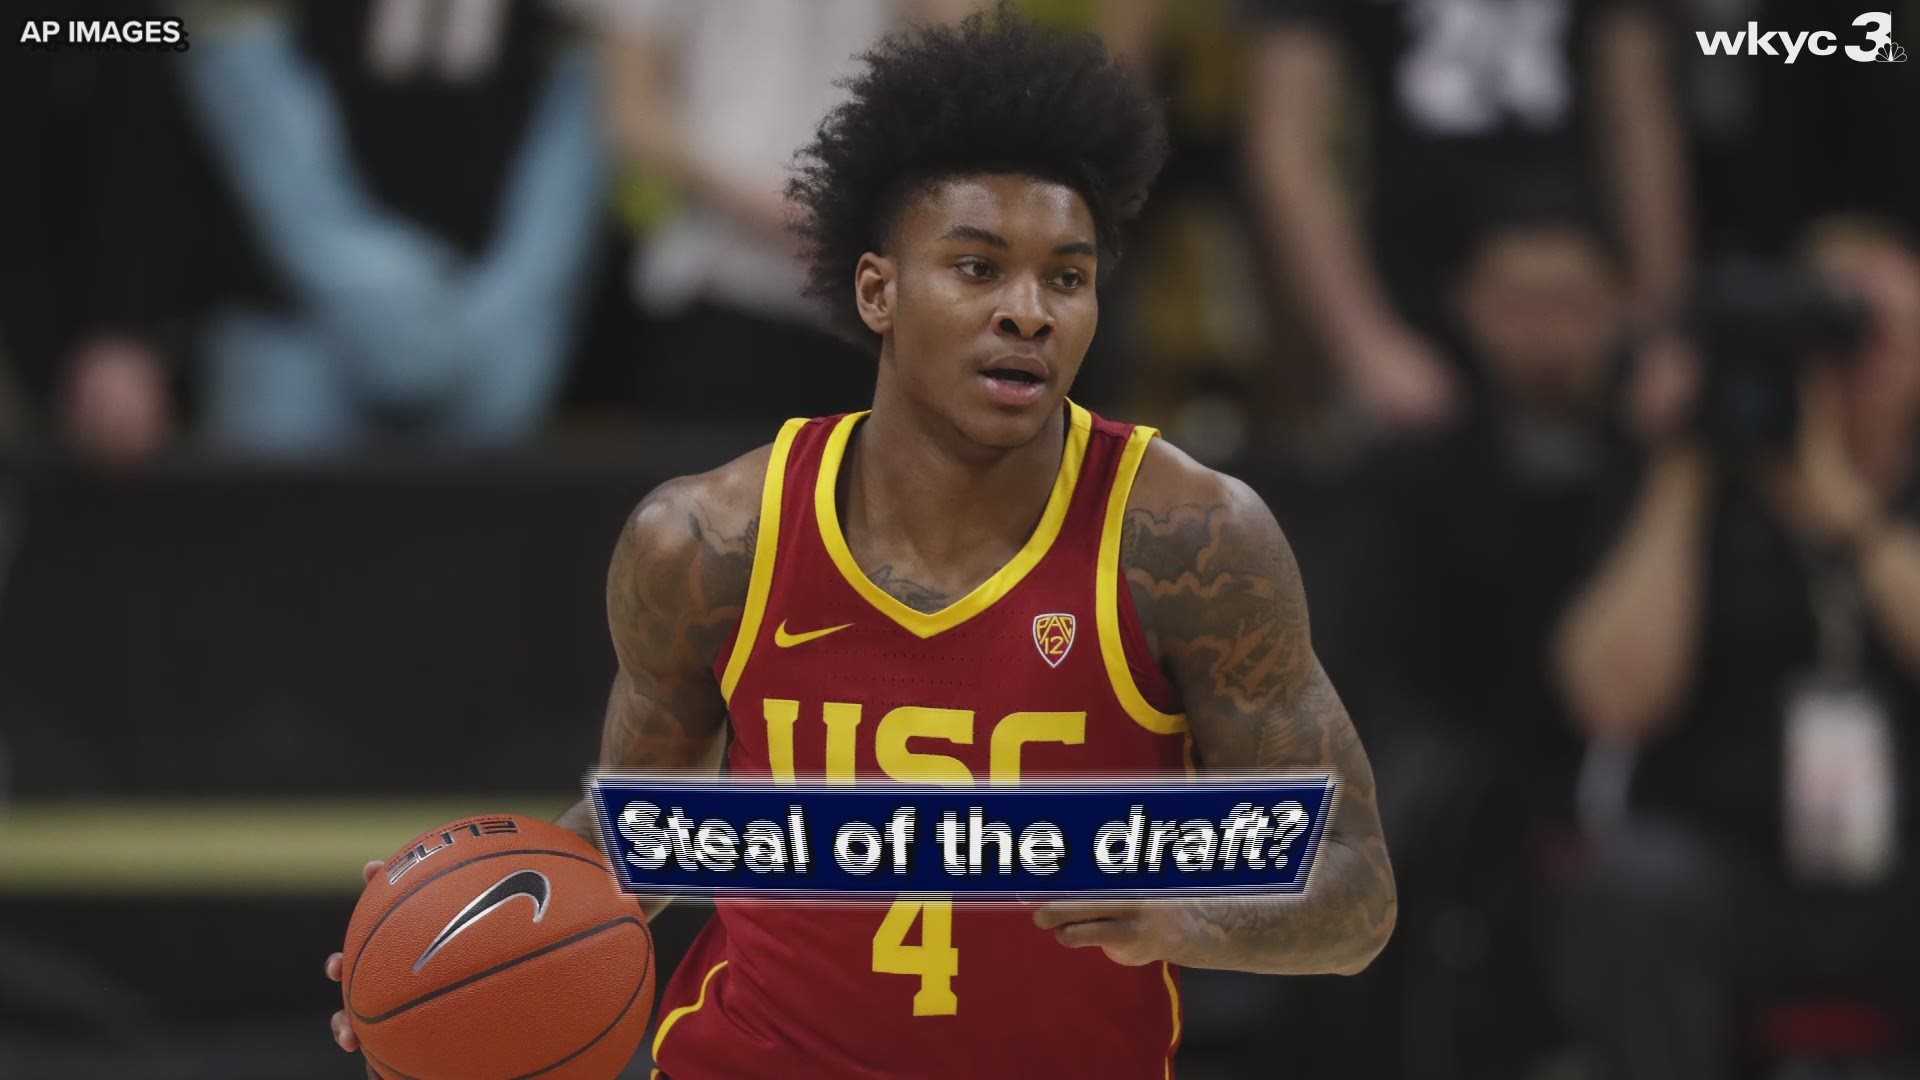 What a steal! In the league's annual rookie survey, Cleveland Cavaliers guard Kevin Porter Jr. was voted the biggest steal of the 2019 NBA Draft.